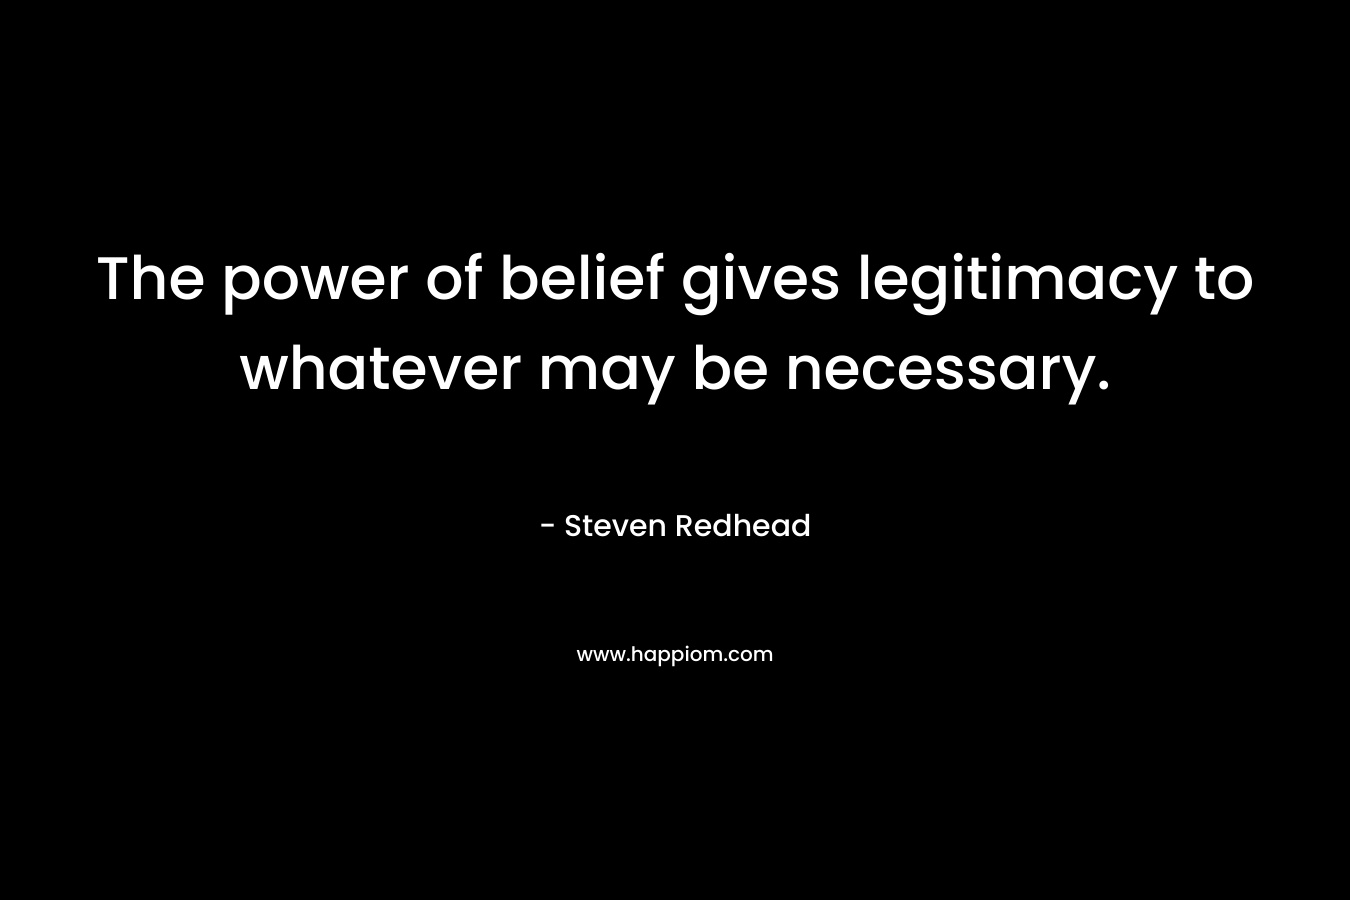 The power of belief gives legitimacy to whatever may be necessary.